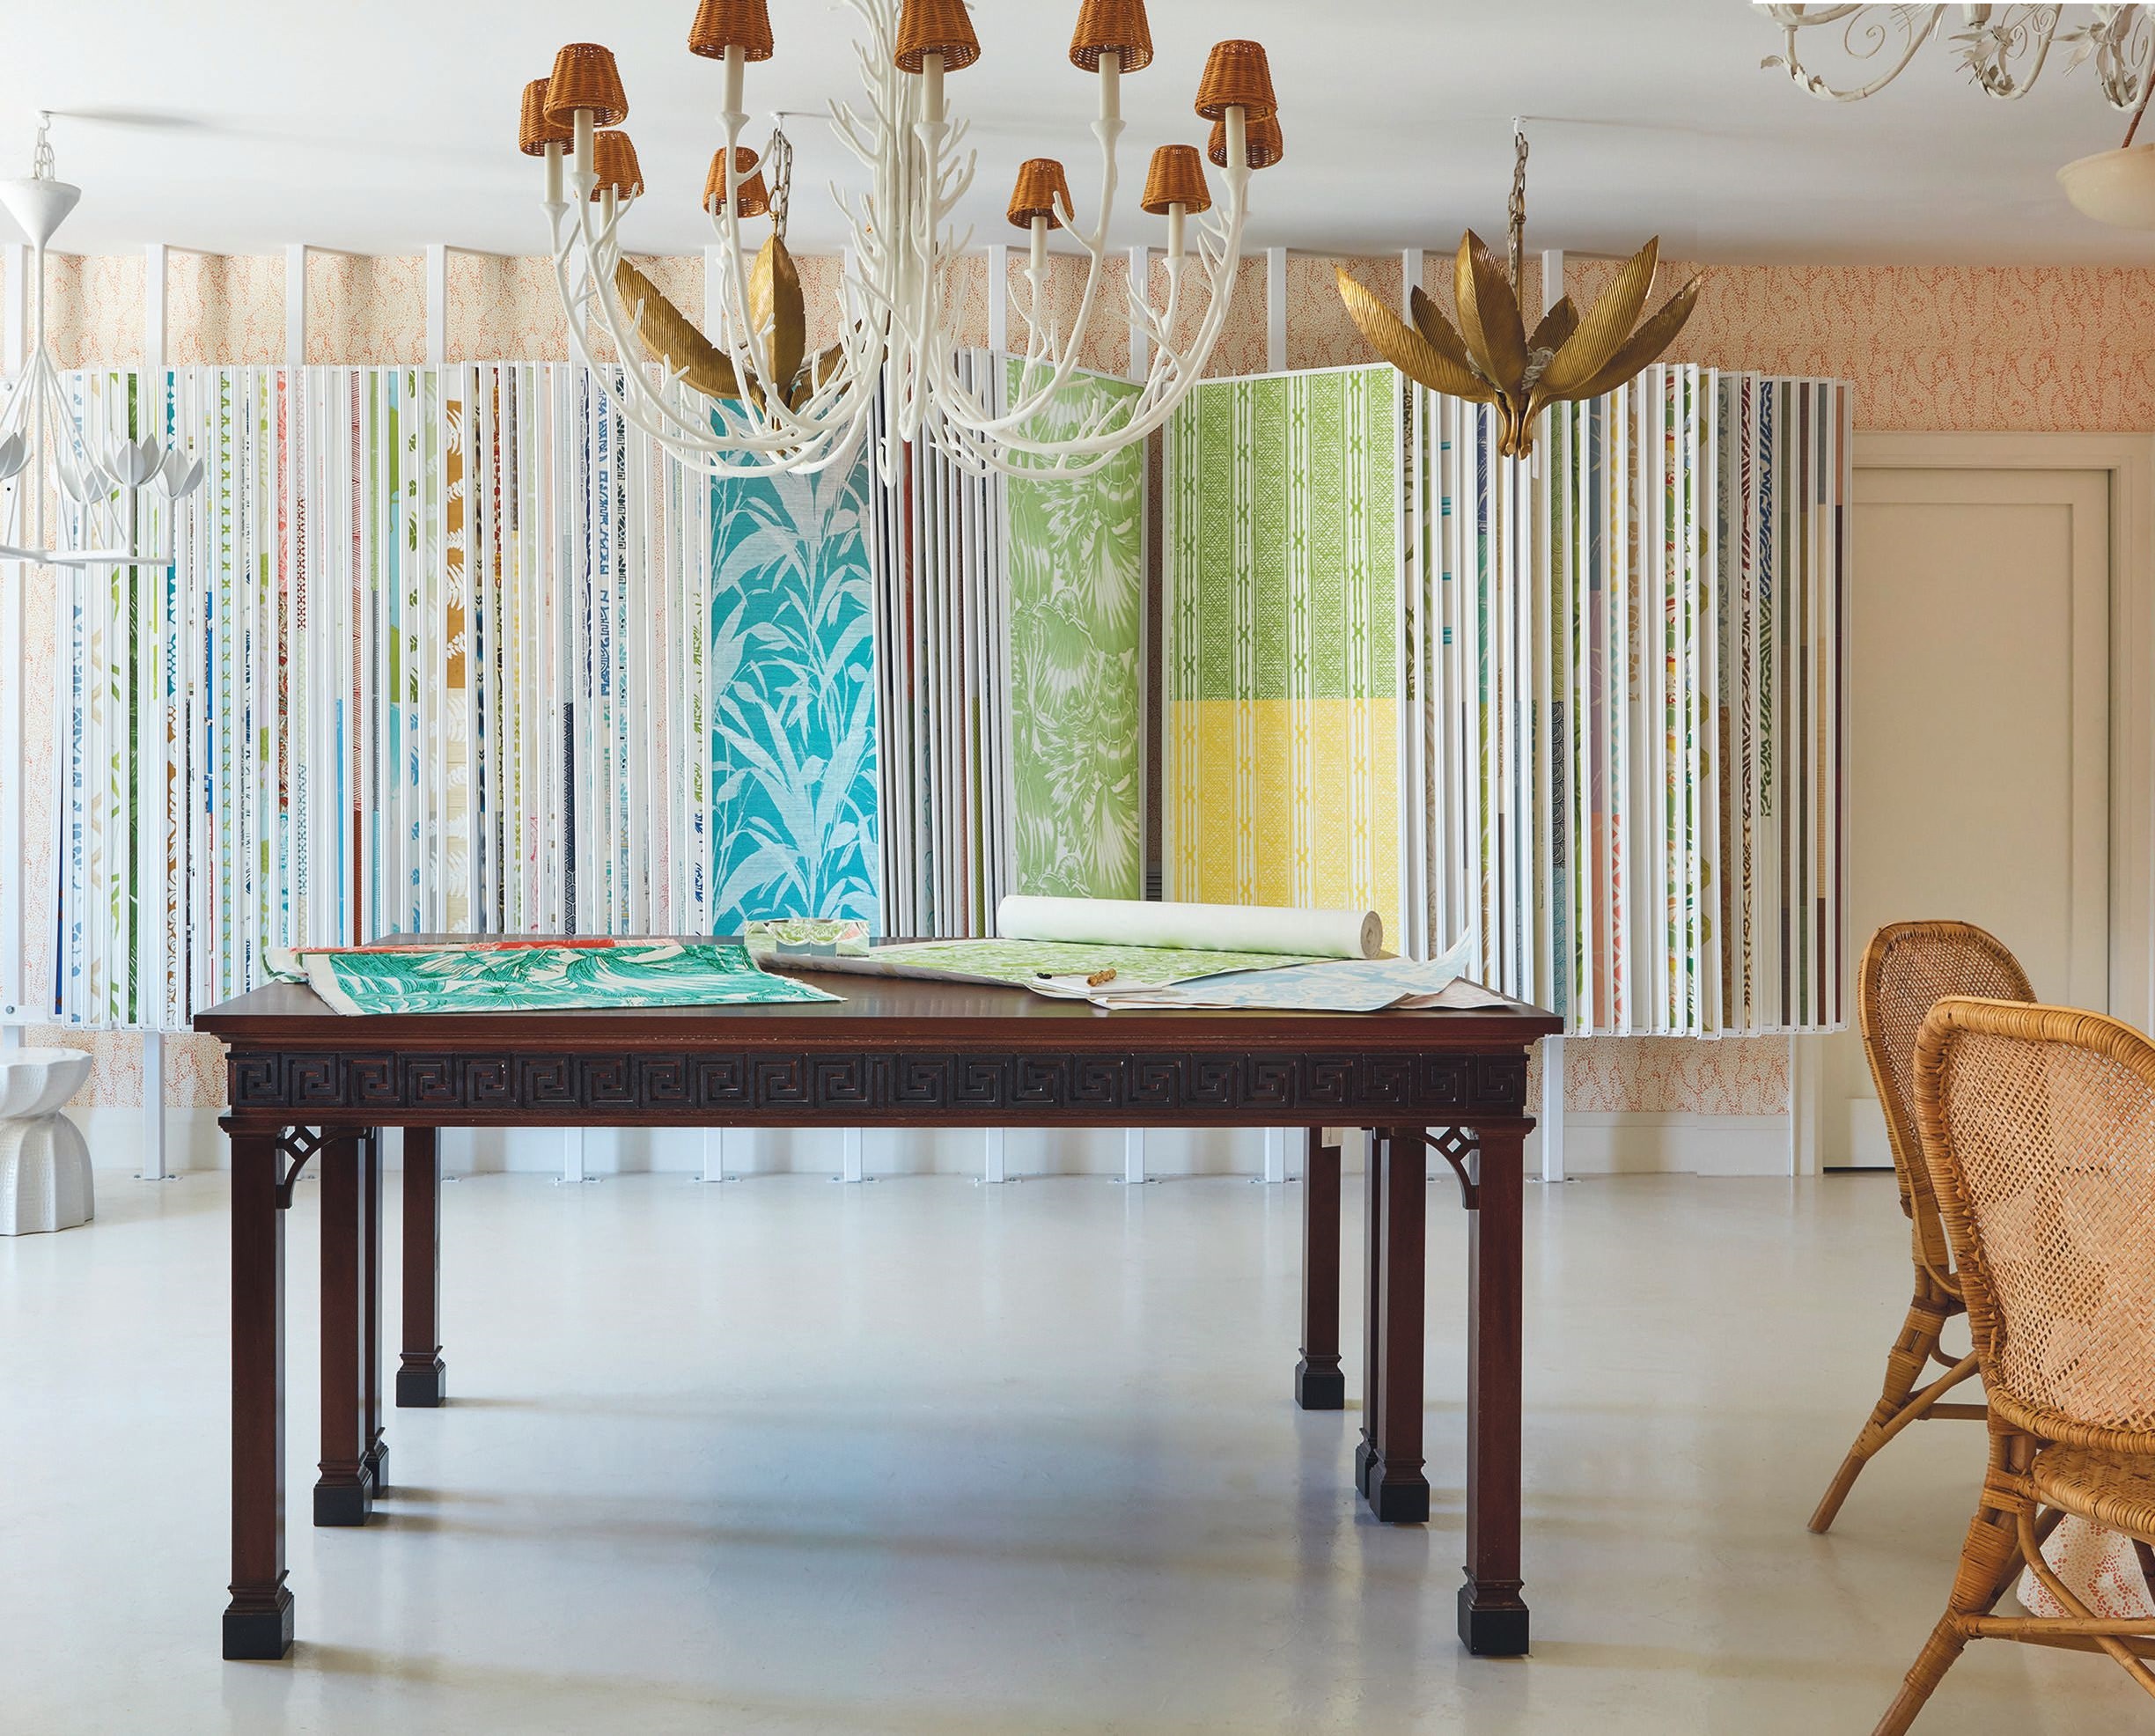 Meg Braff Designs’ latest showroom features the studio’s signature prints and patterns. PHOTO BY BRANTLEY PHOTOS